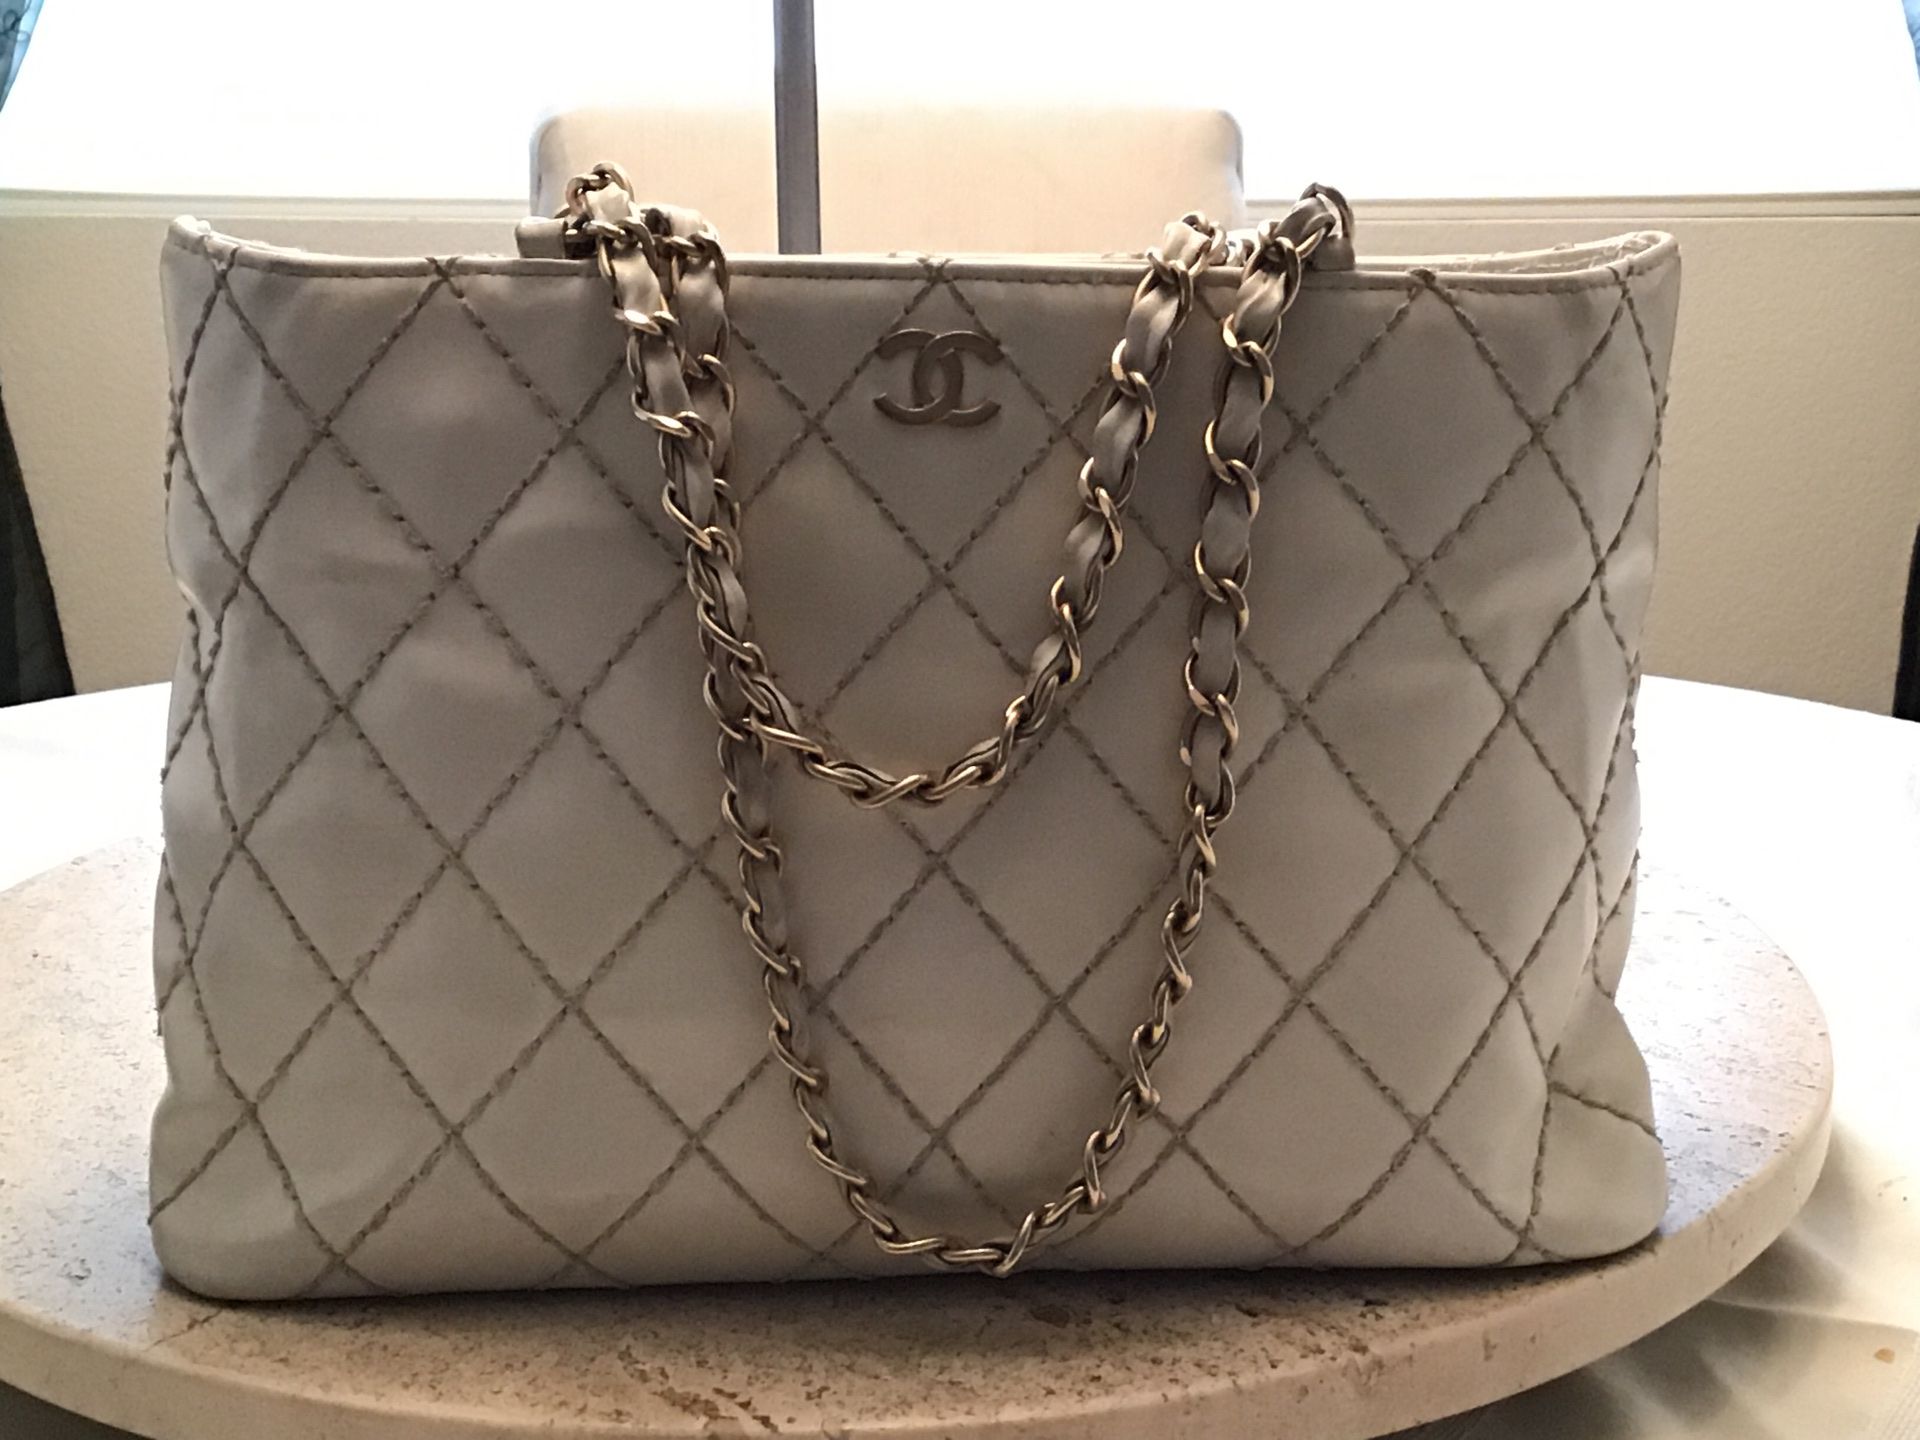 Authentic Chanel Wild Stitch Bag (NO LOW BALL OFFERS)